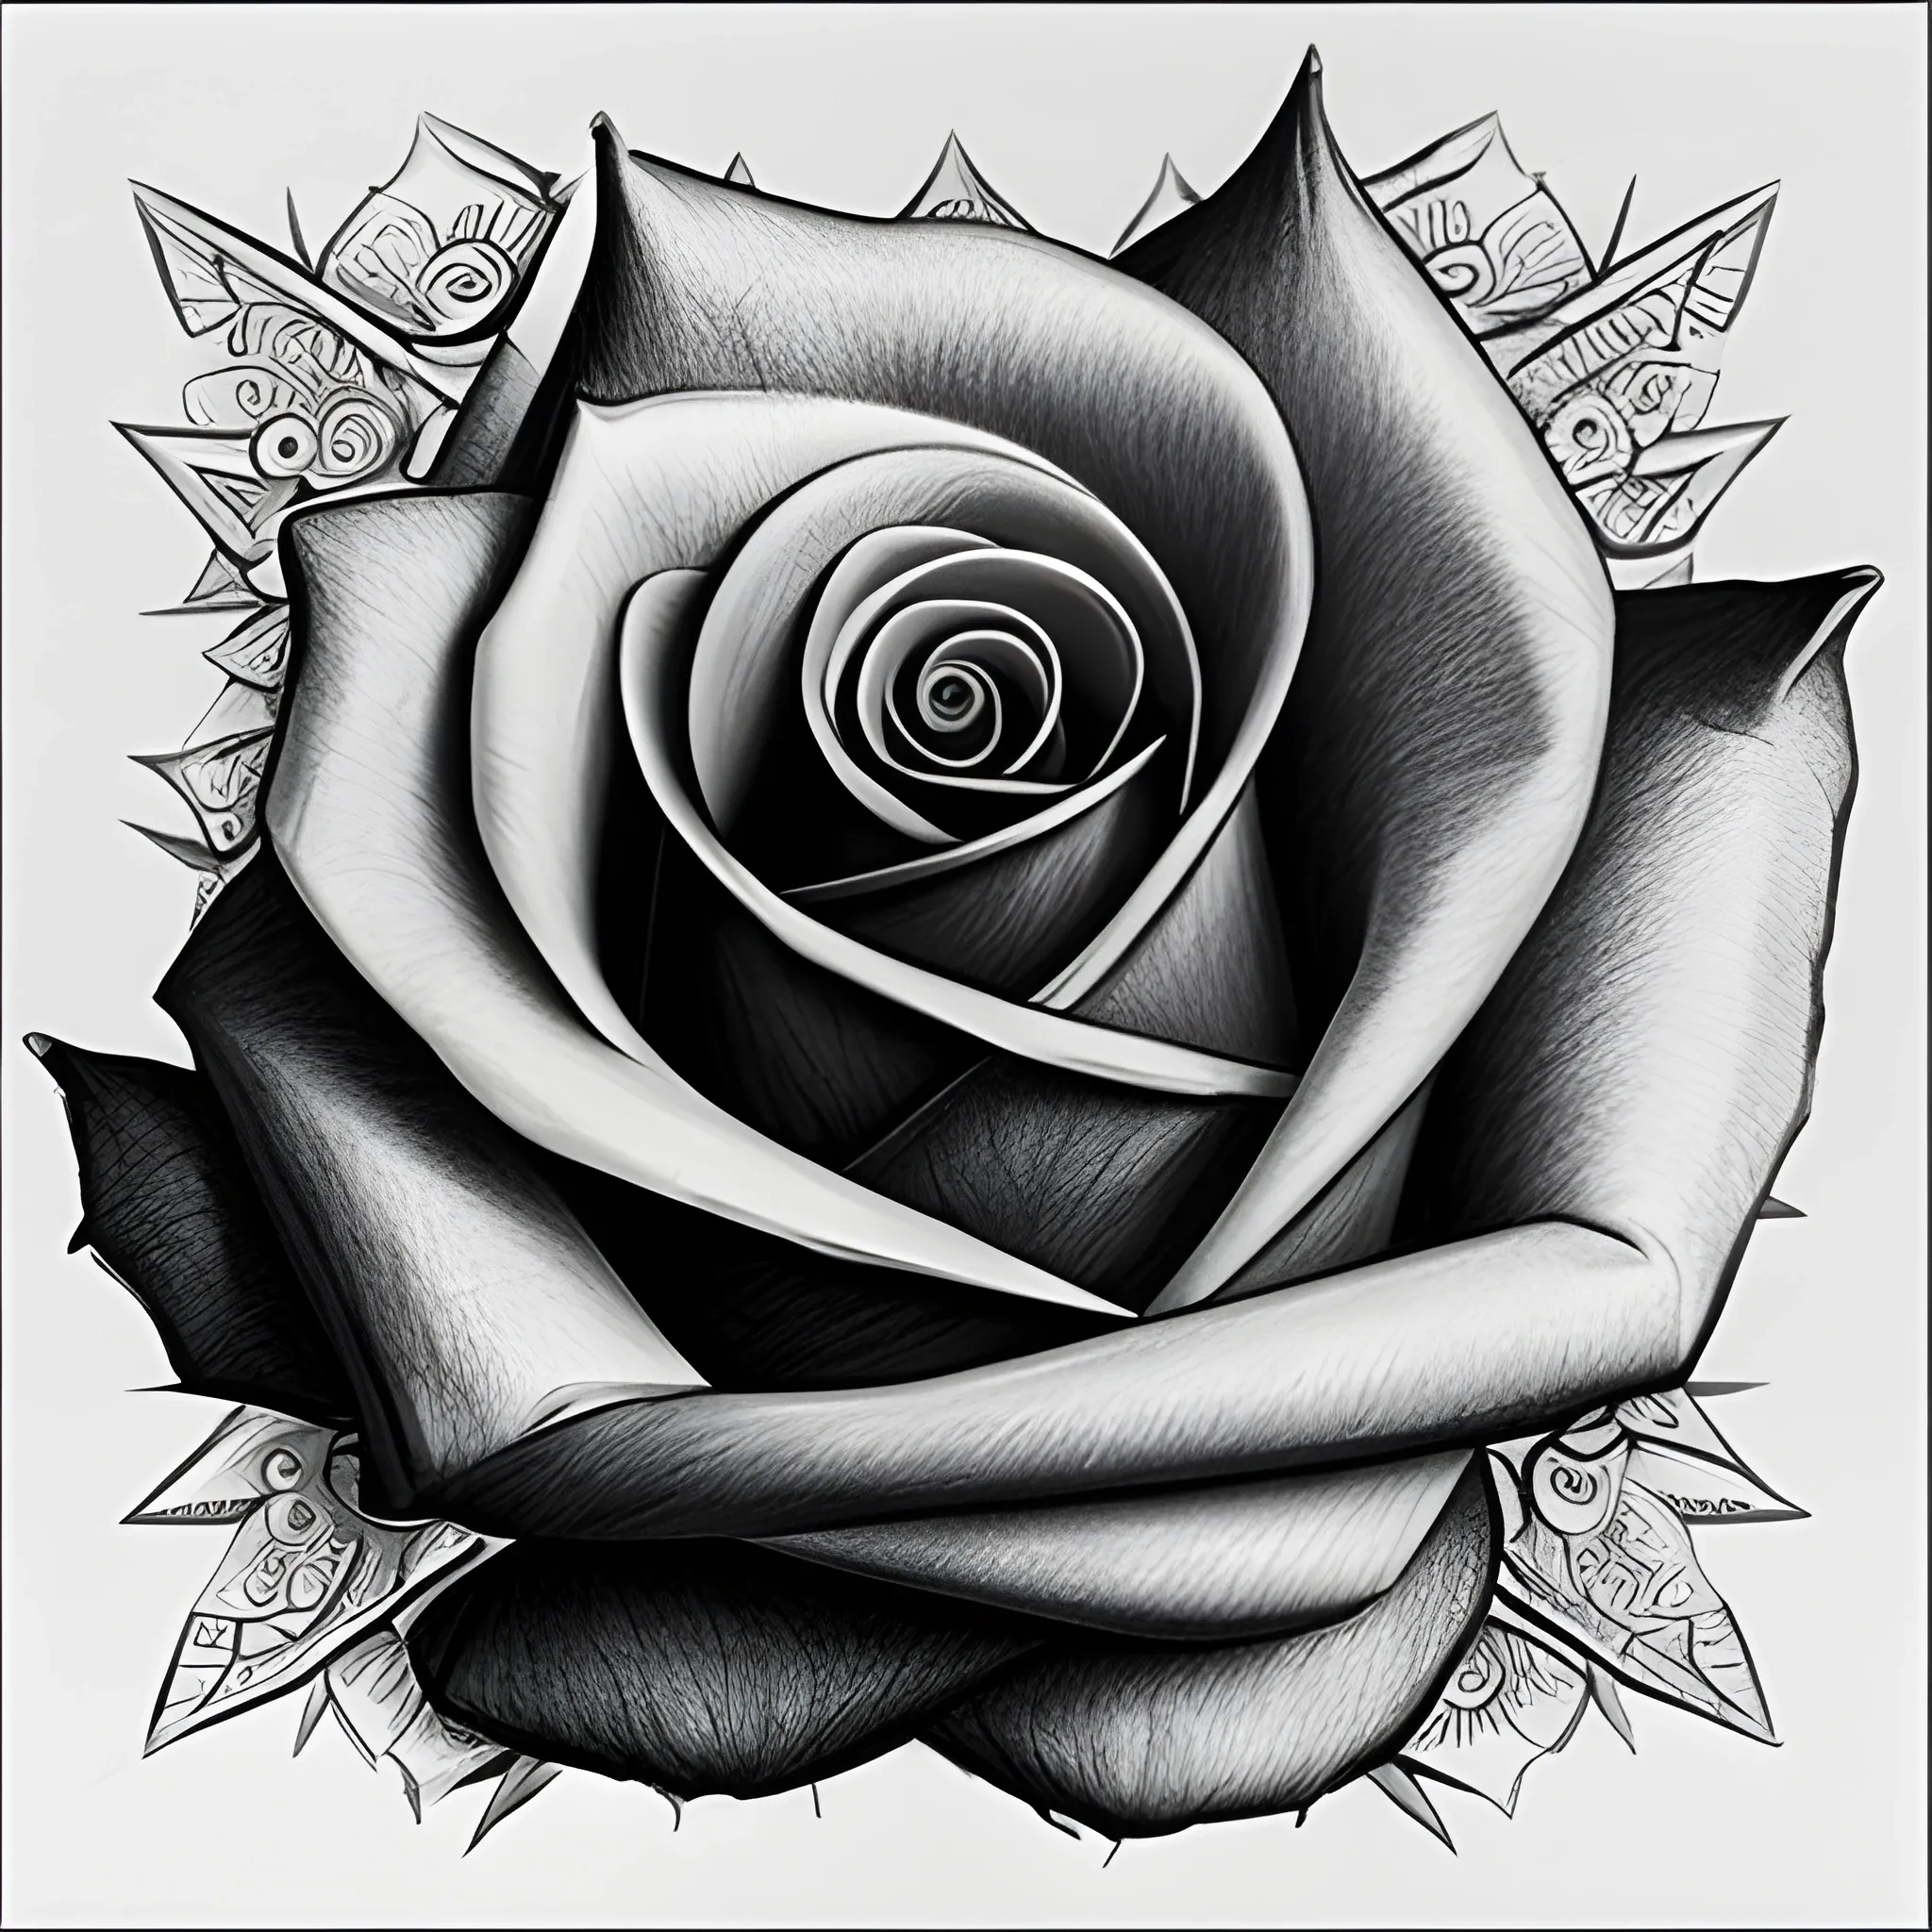 A Step-by-Step Guide of How to Draw a Rose by Floral Tattoo Artist Lu Loram  Martin – Lu Loram-Martin